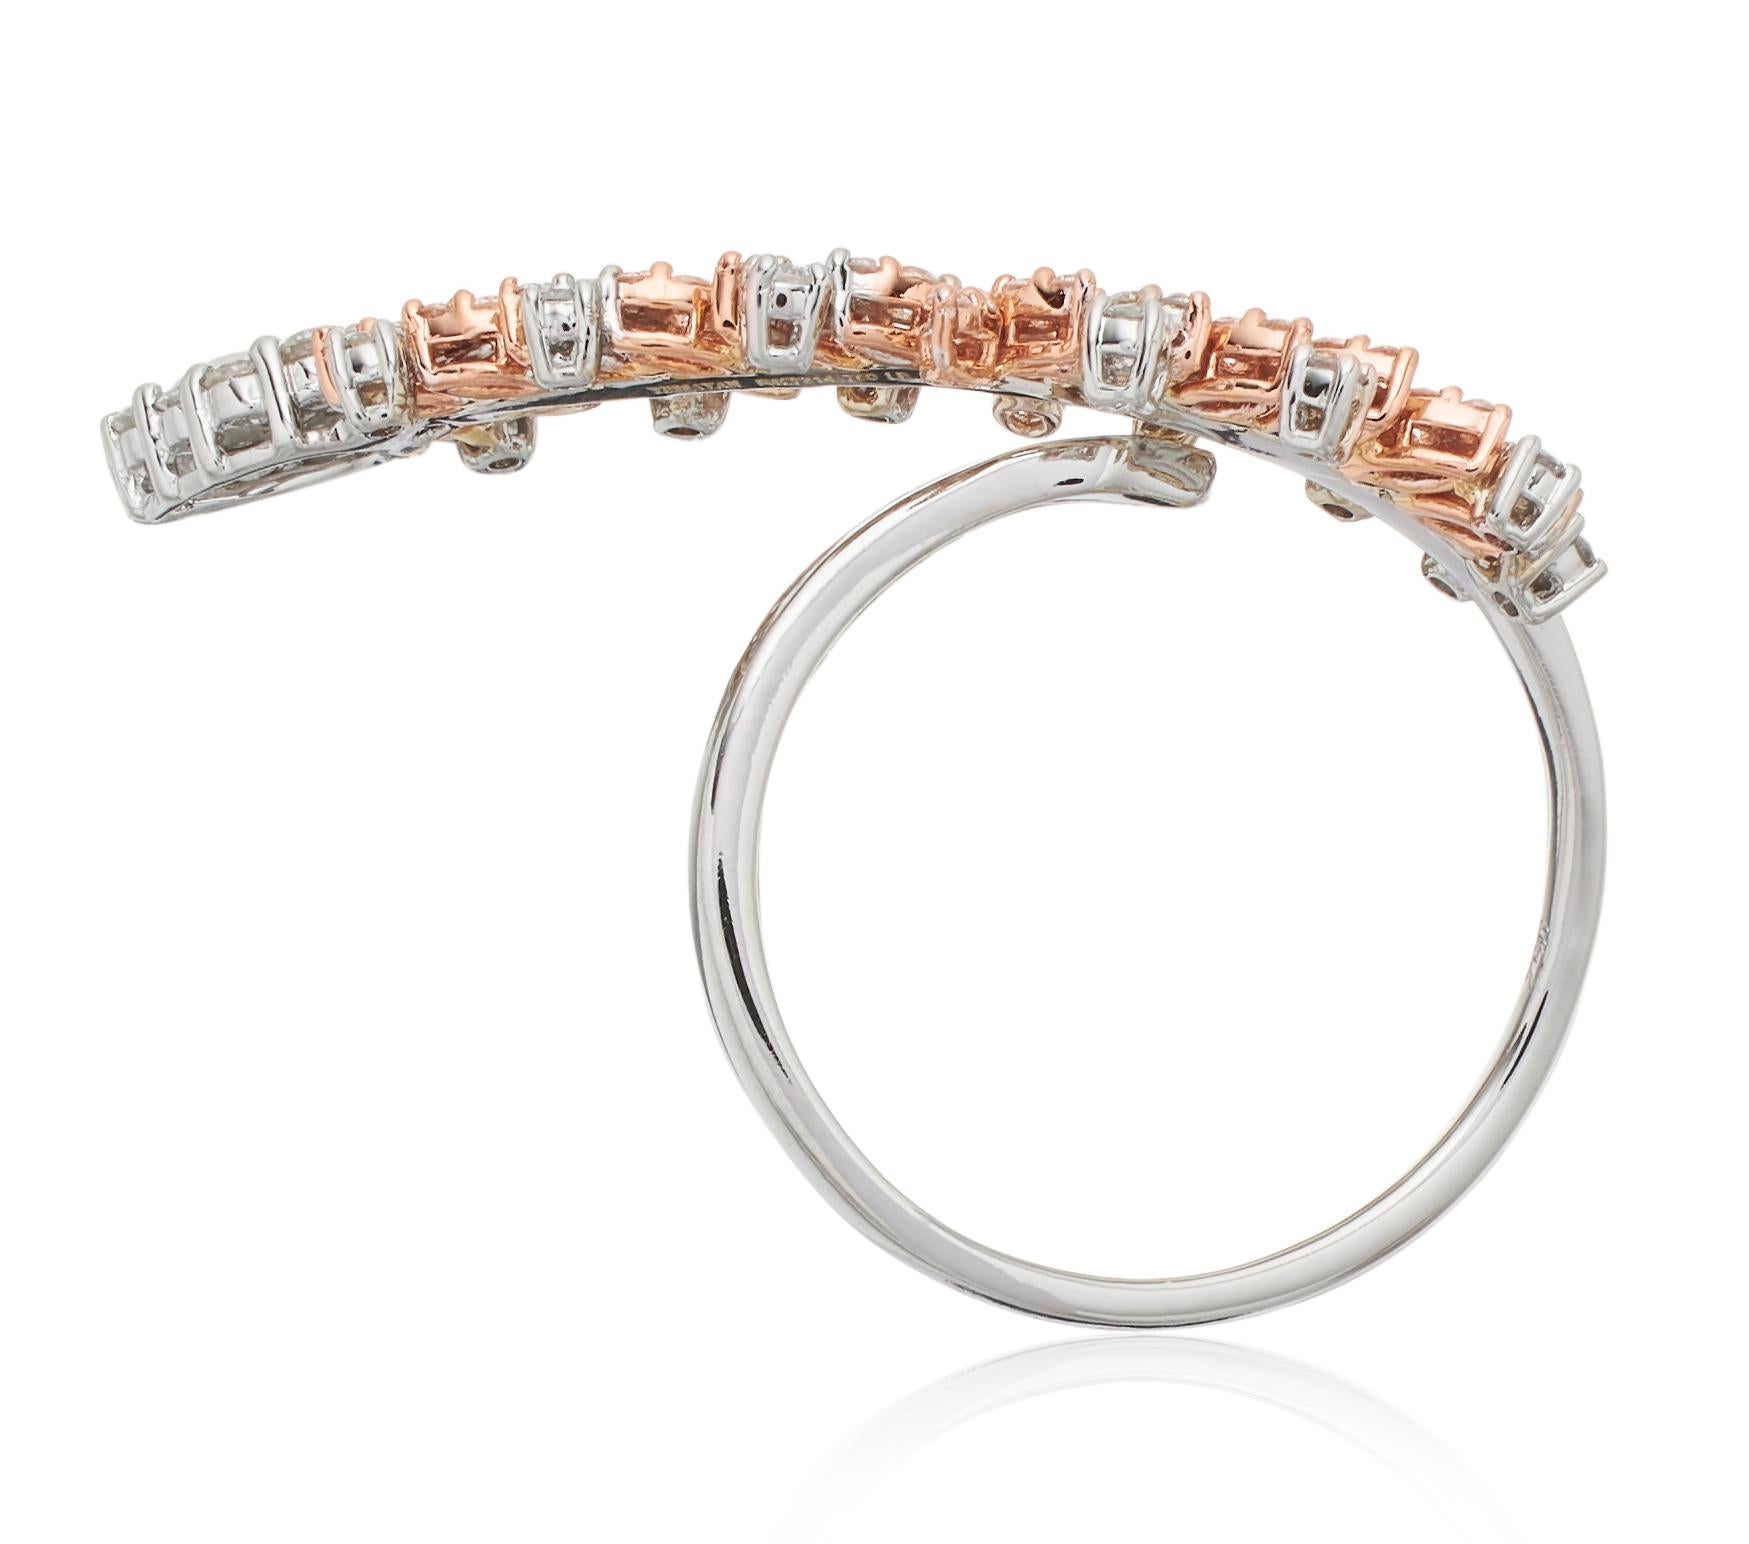 Modern White and Fancy Colour Natural Pink Diamond Statement Ring by Designer Yessayan